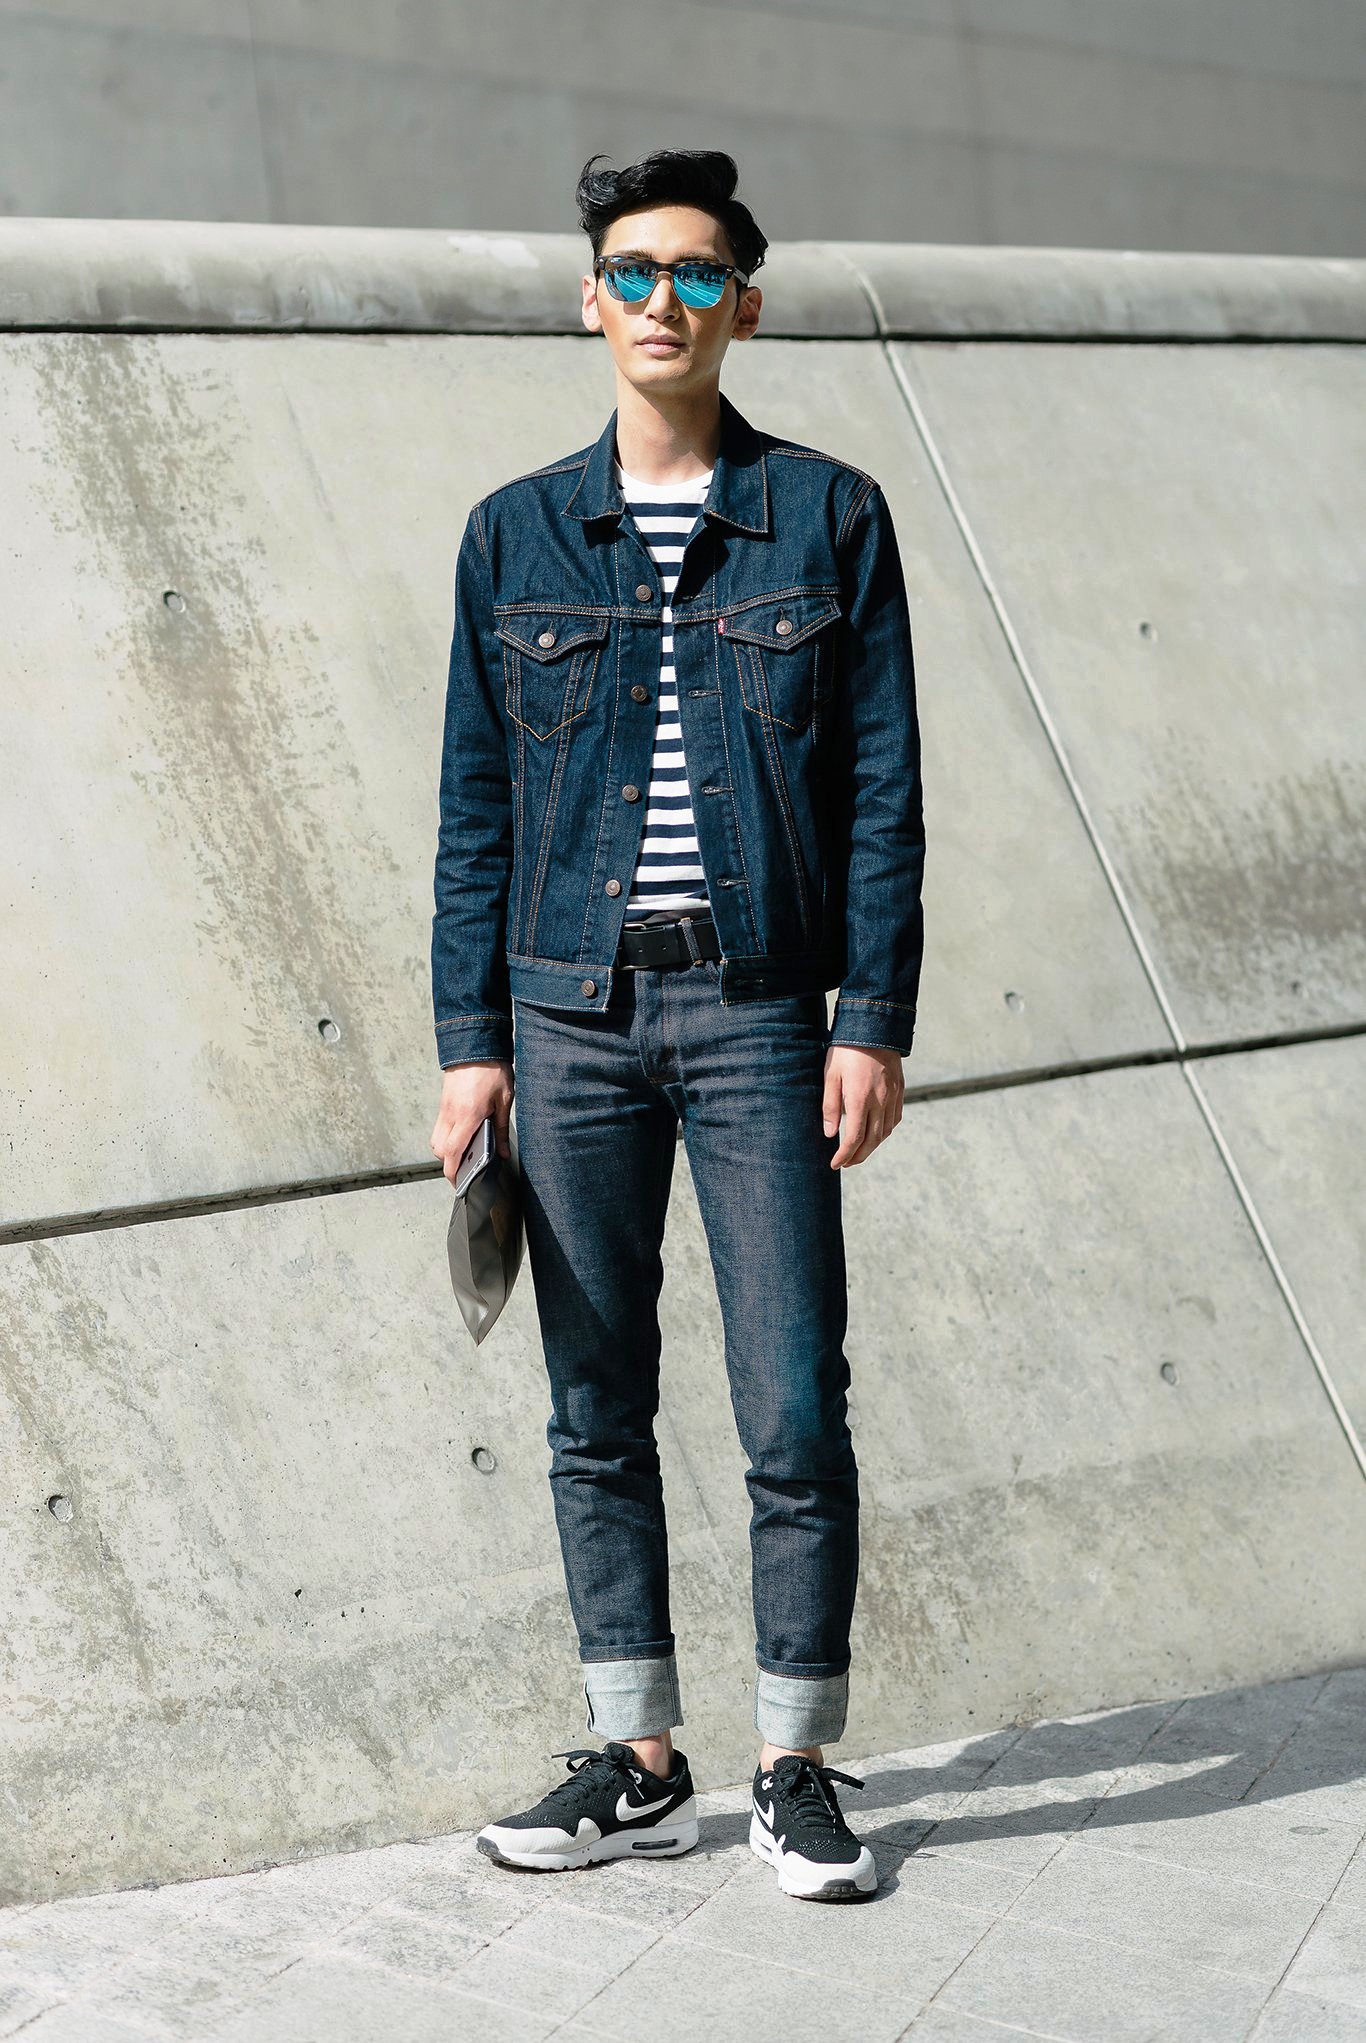 How To Look For Mens Fall Clothes Intended for Fall